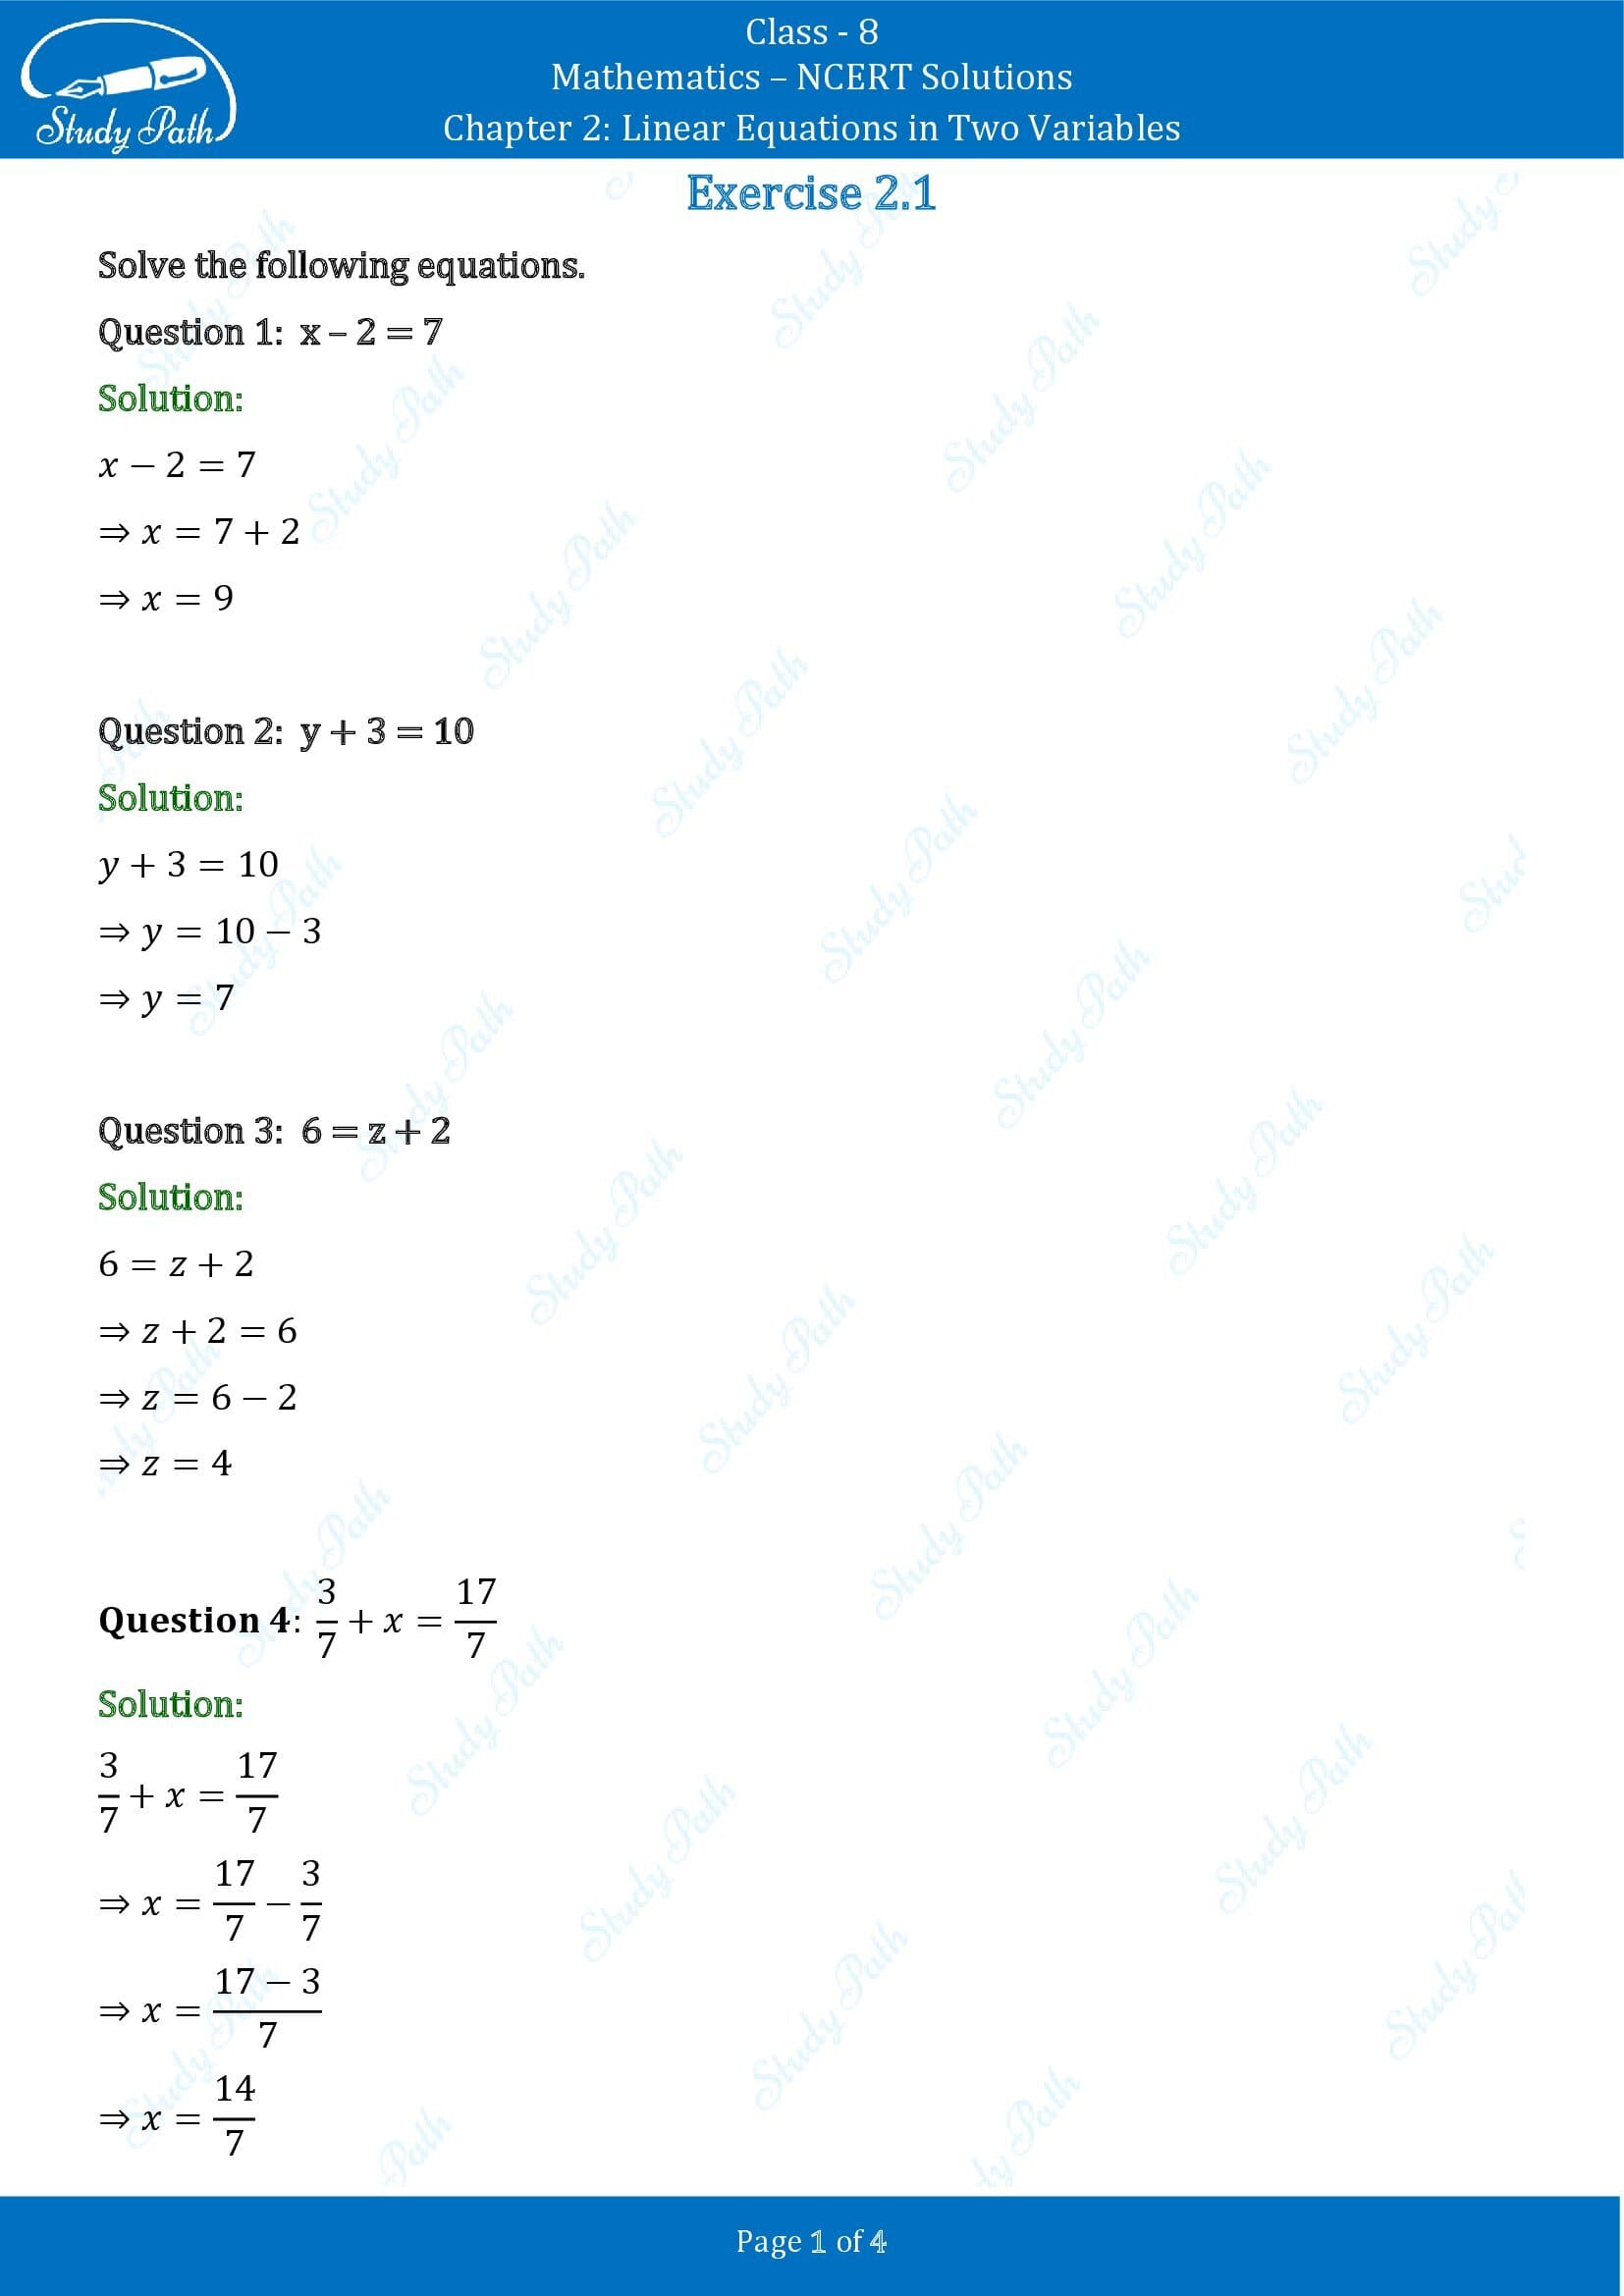 NCERT Solutions for Class 8 Maths Chapter 2 Linear Equations in Two Variables Exercise 2.1 00001